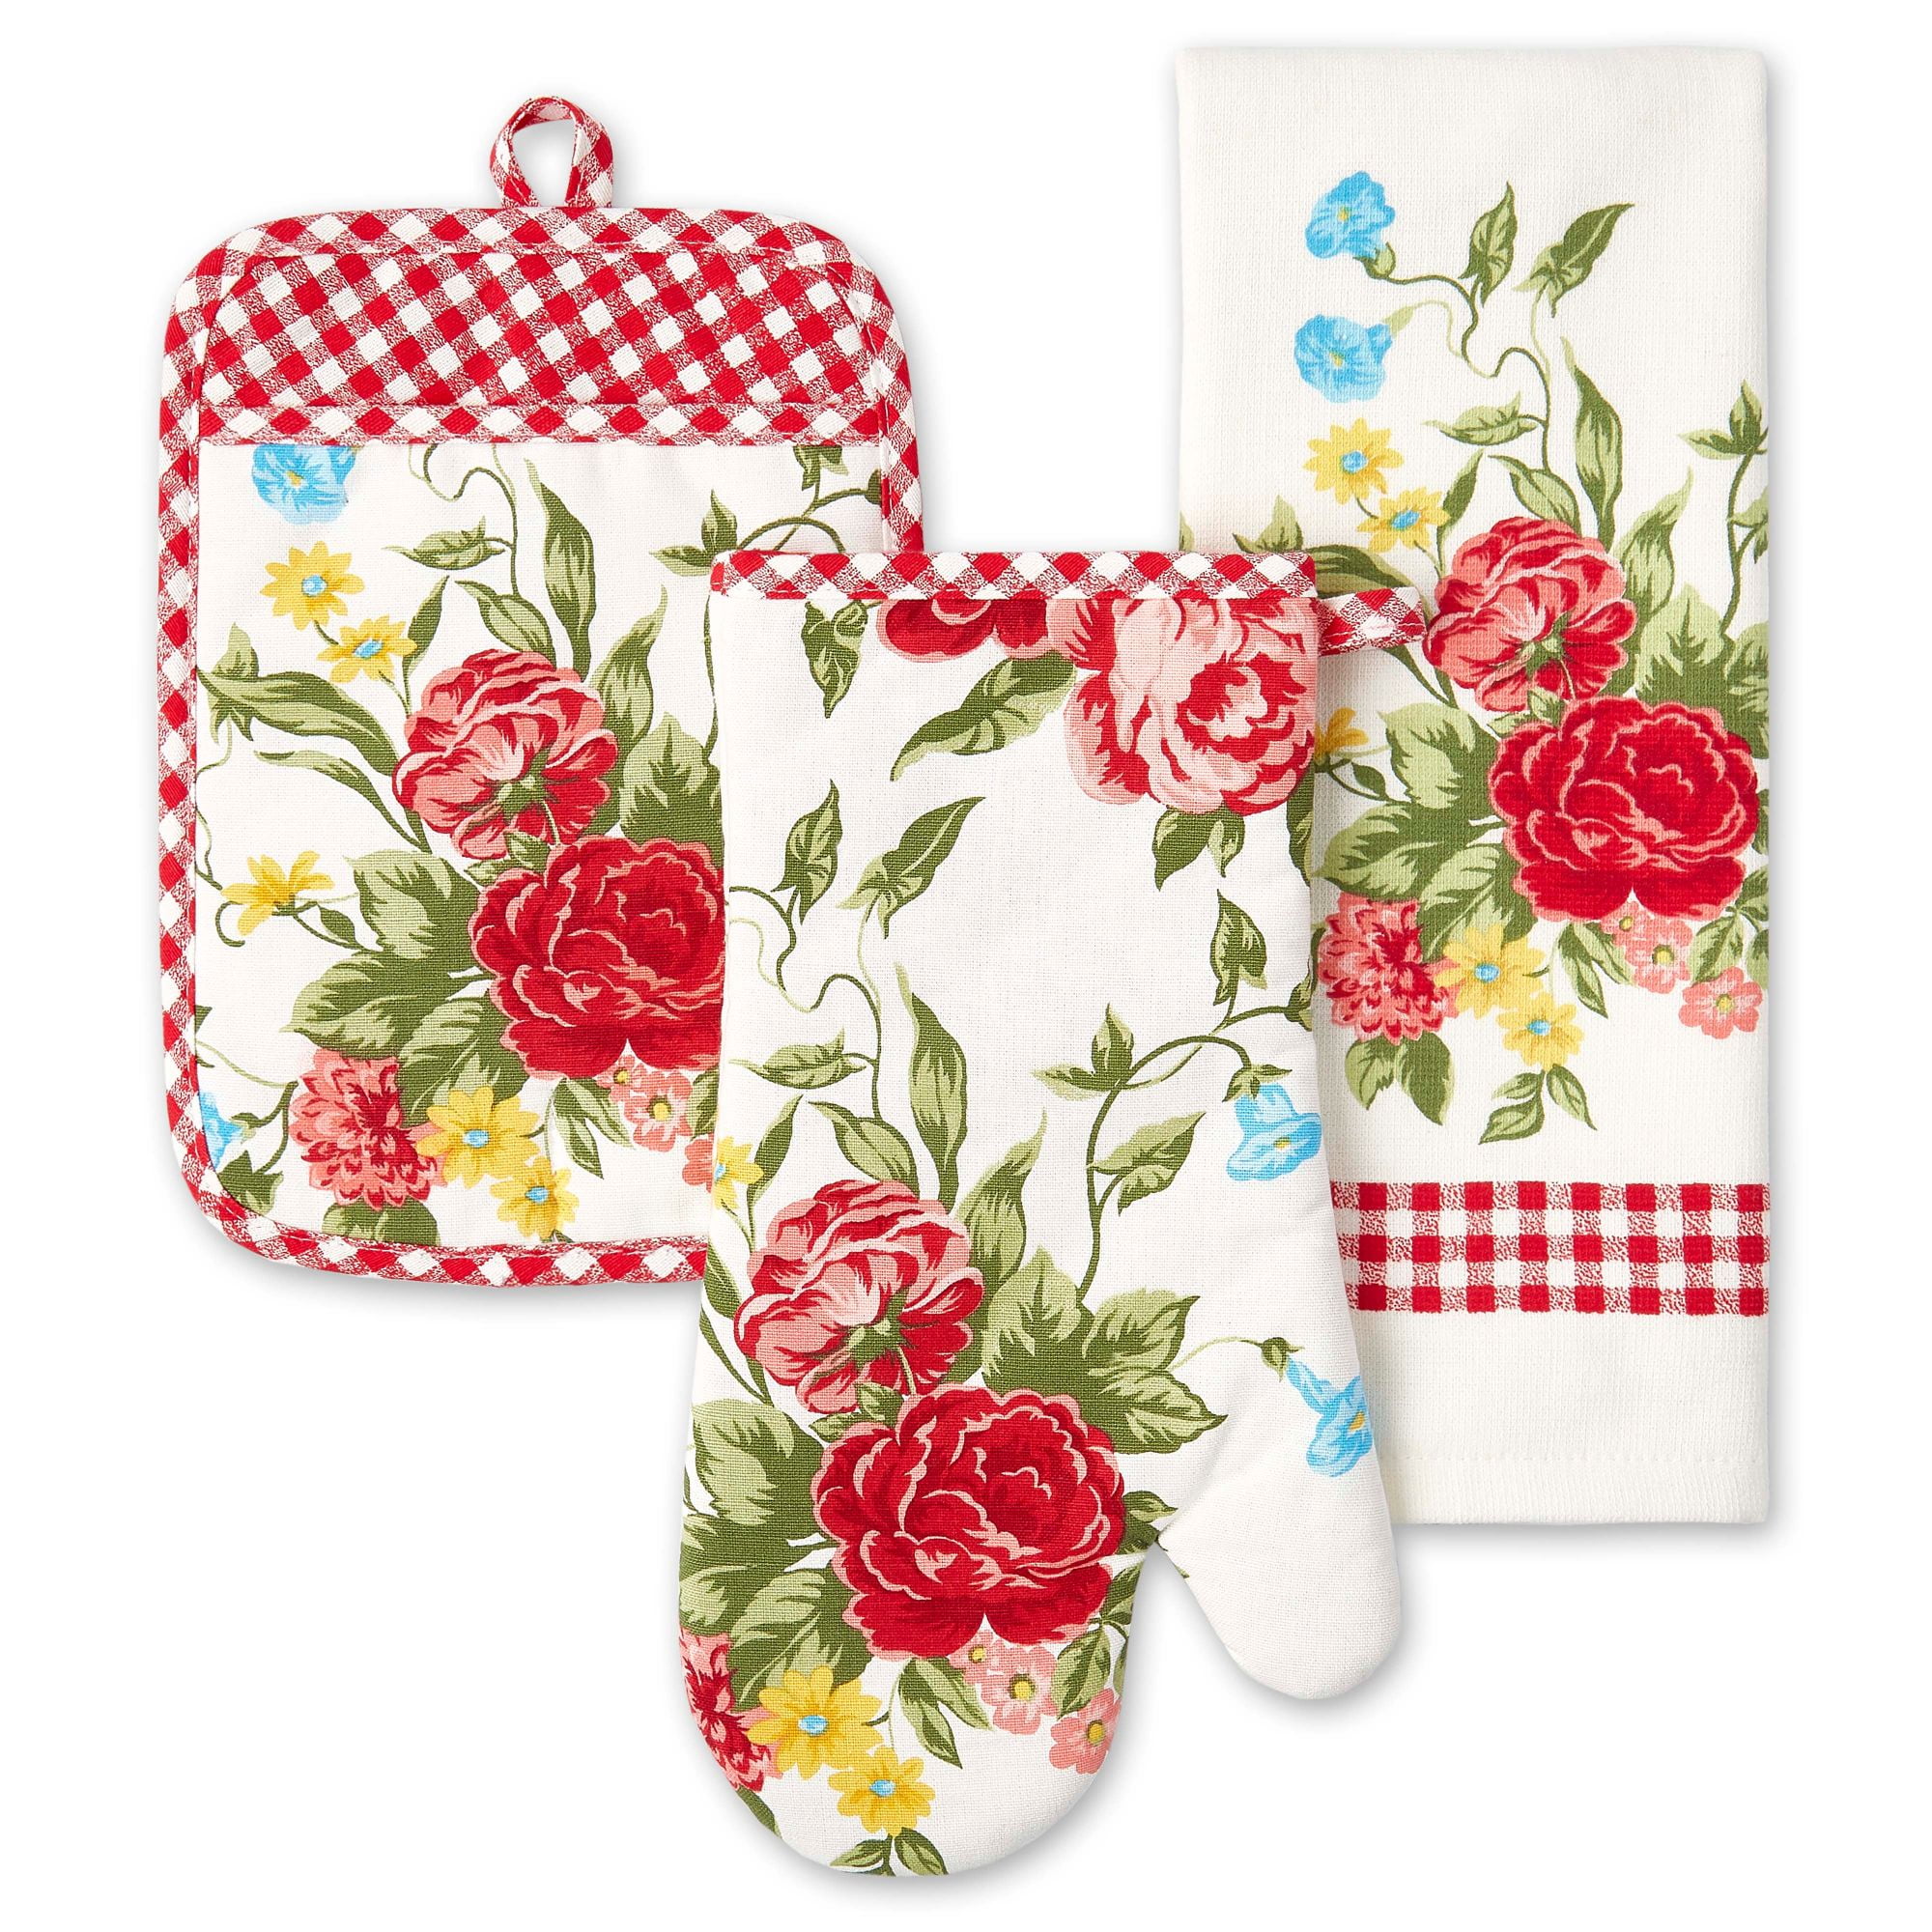 THE PIONEER WOMAN SPICY COWGIRL KITCHEN TOWEL, OVEN MITT